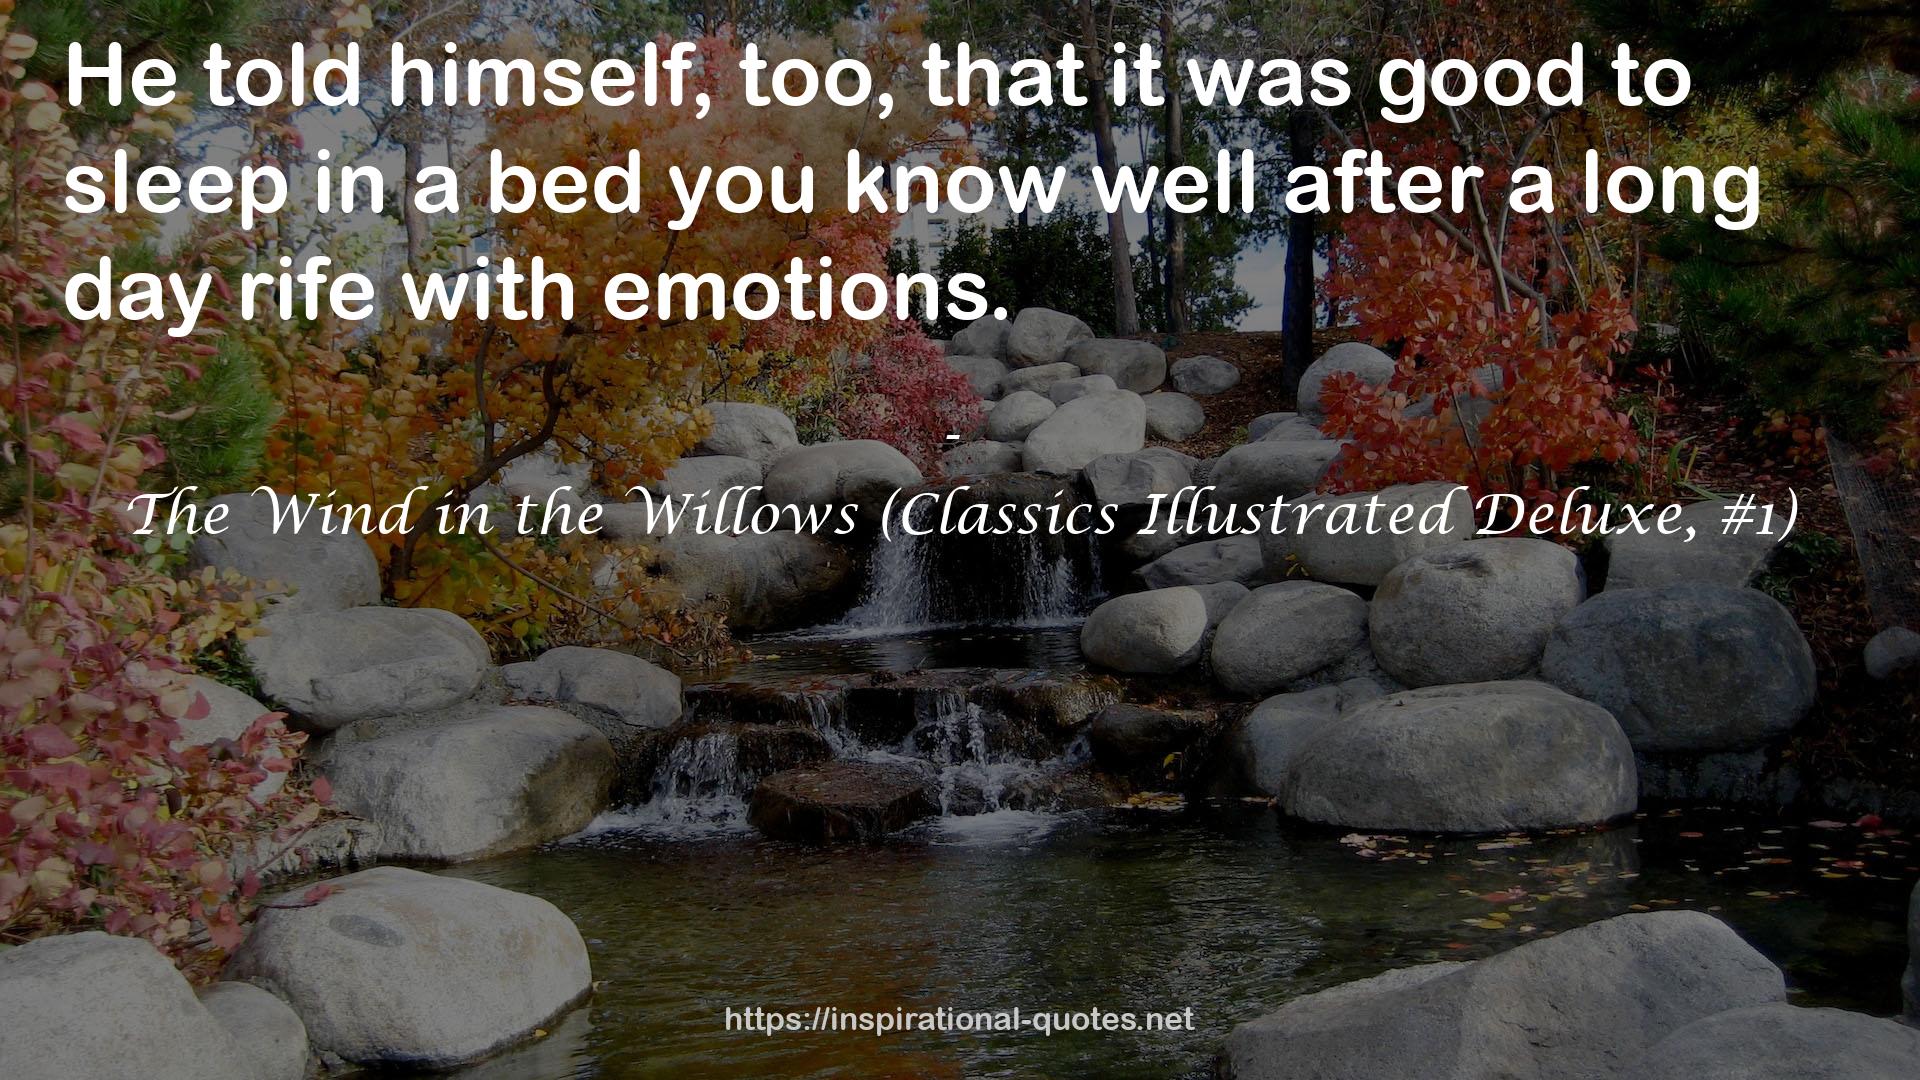 The Wind in the Willows (Classics Illustrated Deluxe, #1) QUOTES